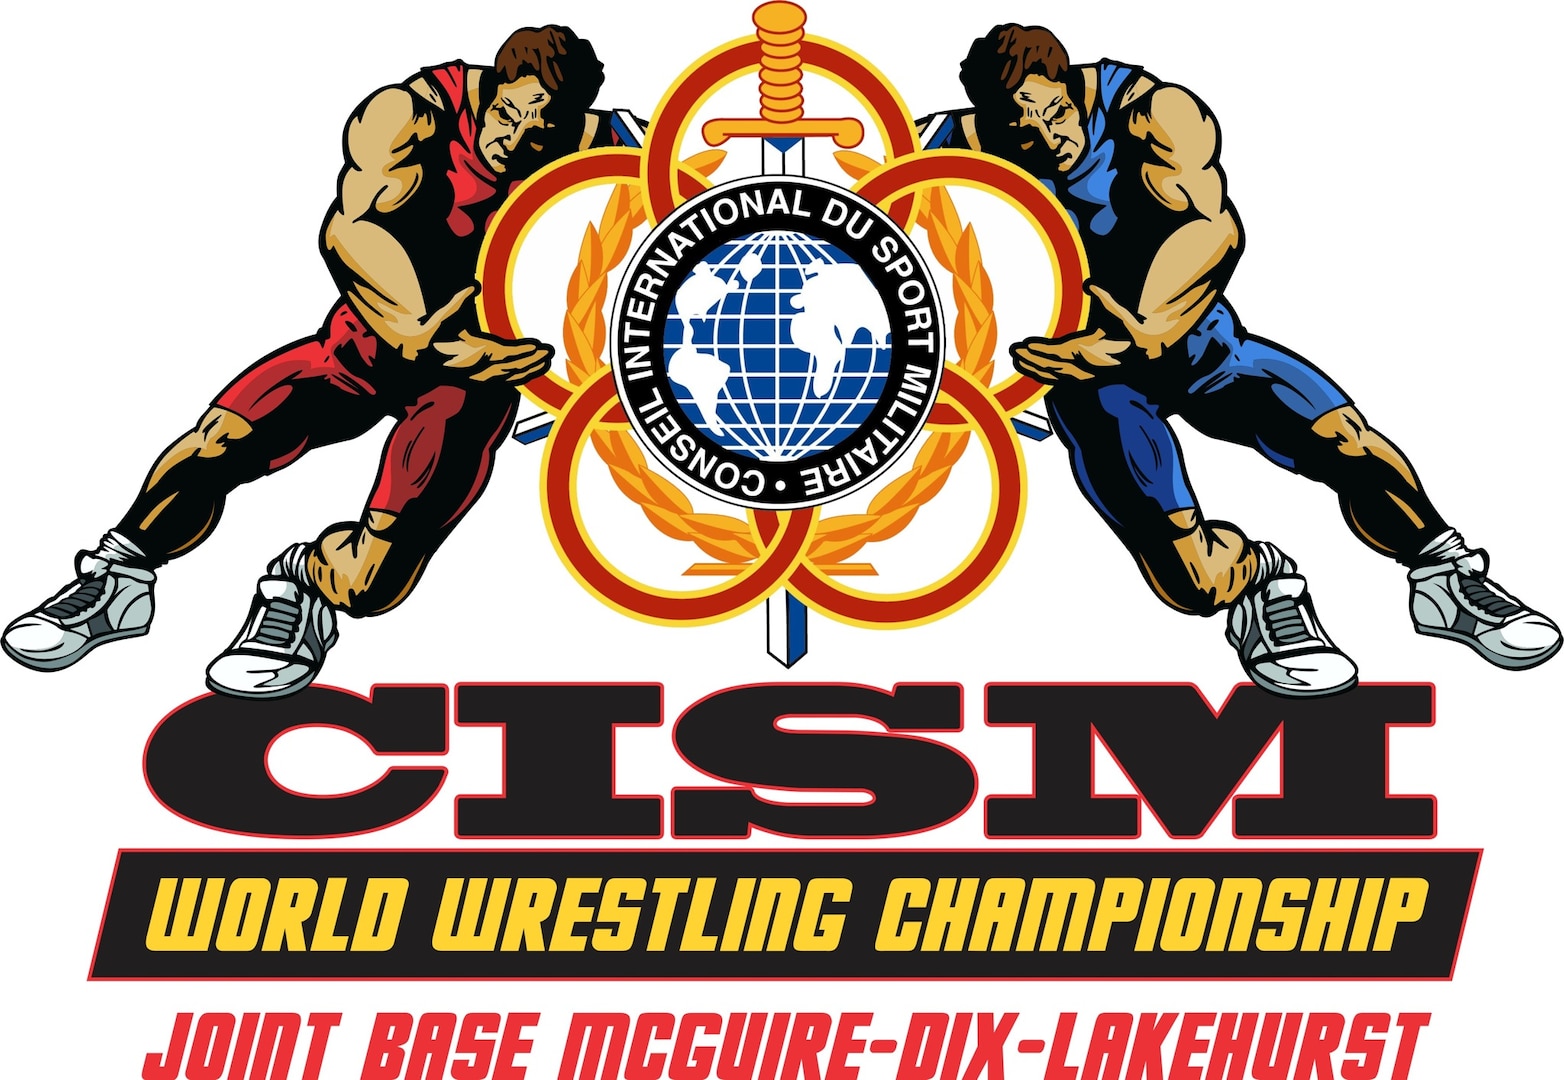 The 2014 CISM World Military Championship at Joint Base McGuire-Dix-Lakehurst, New Jersey 1-8 October.